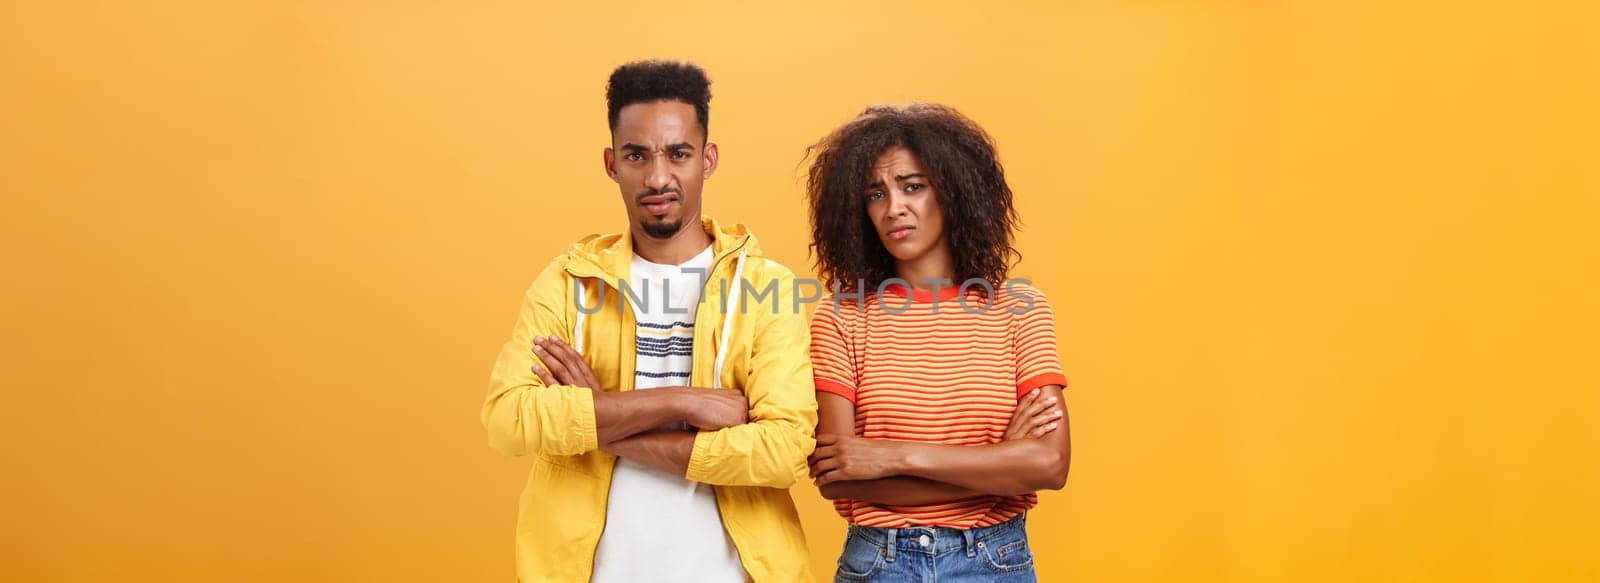 Two friends dislike lame idea of mate. Portrait of dissatisfied unimpressed african american man and woman crossing arms on chest in aversion frowning doubtful and disappointed over orange wall.